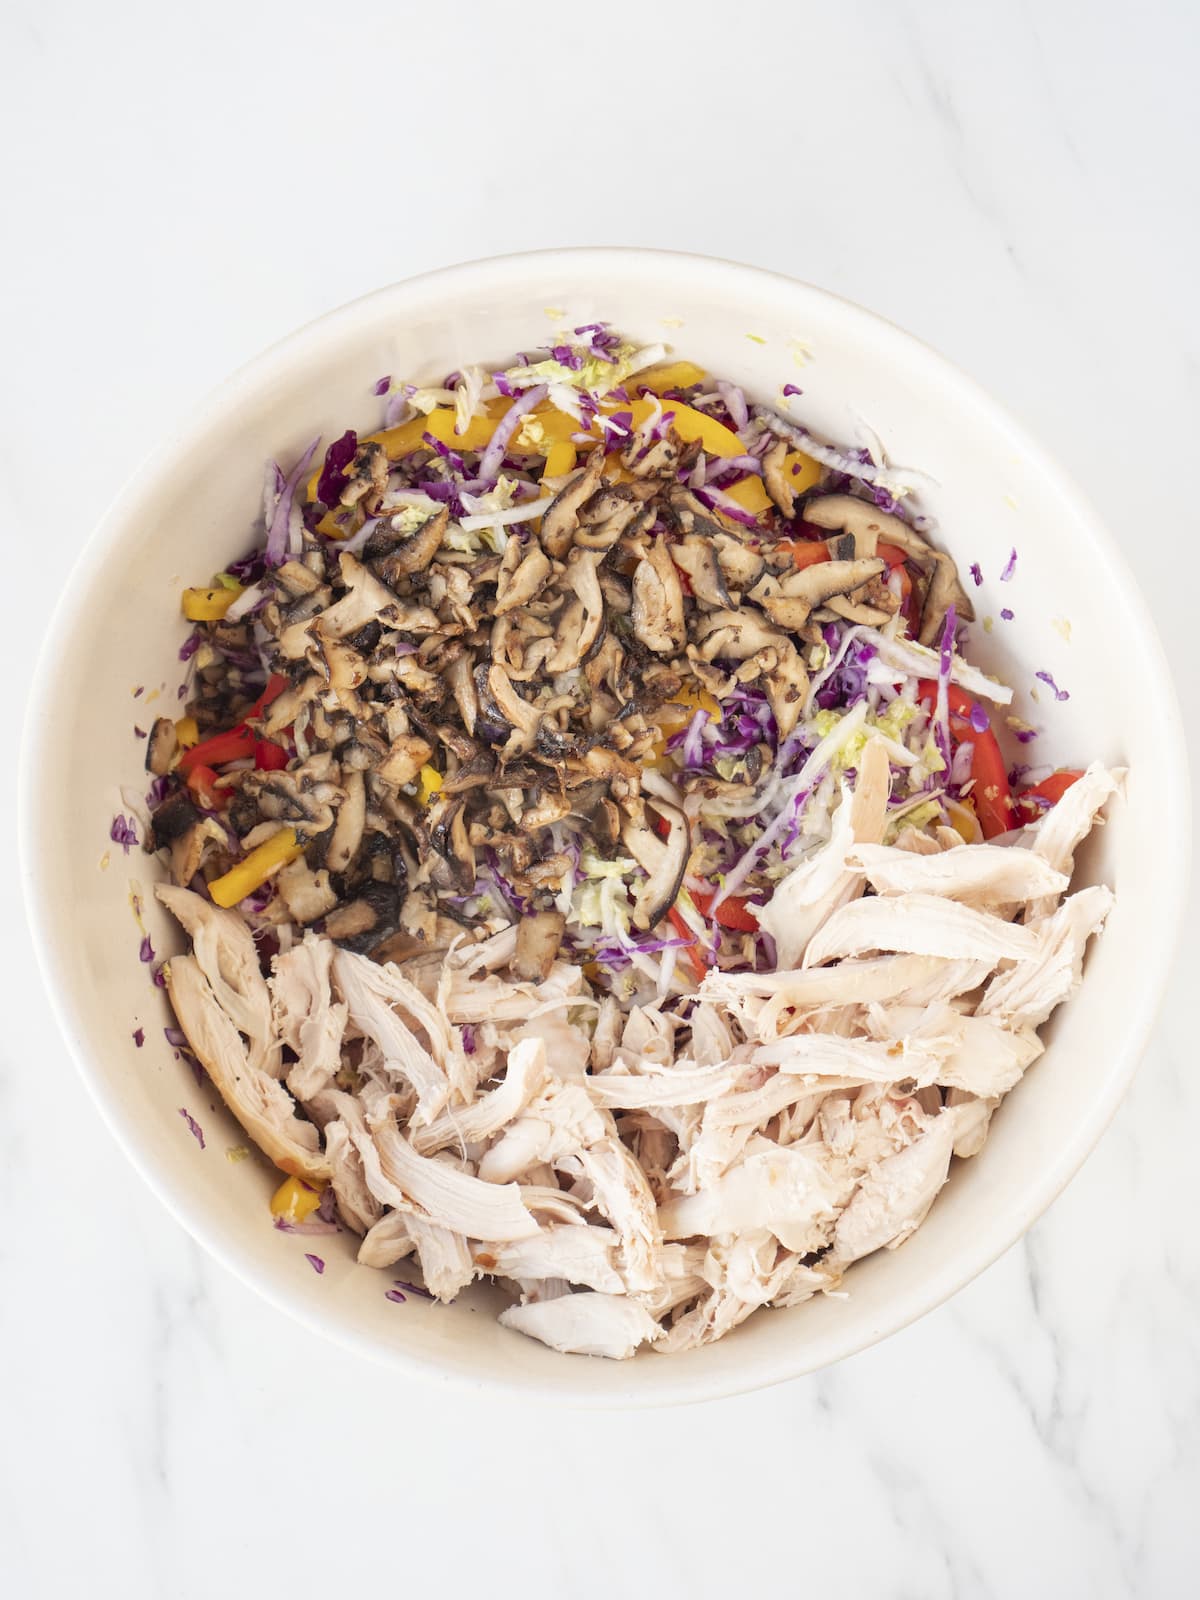 A white bowl with all the veggies- cabbages, bell peppers and mushrooms mixed in, along with shredded chicken breasts.